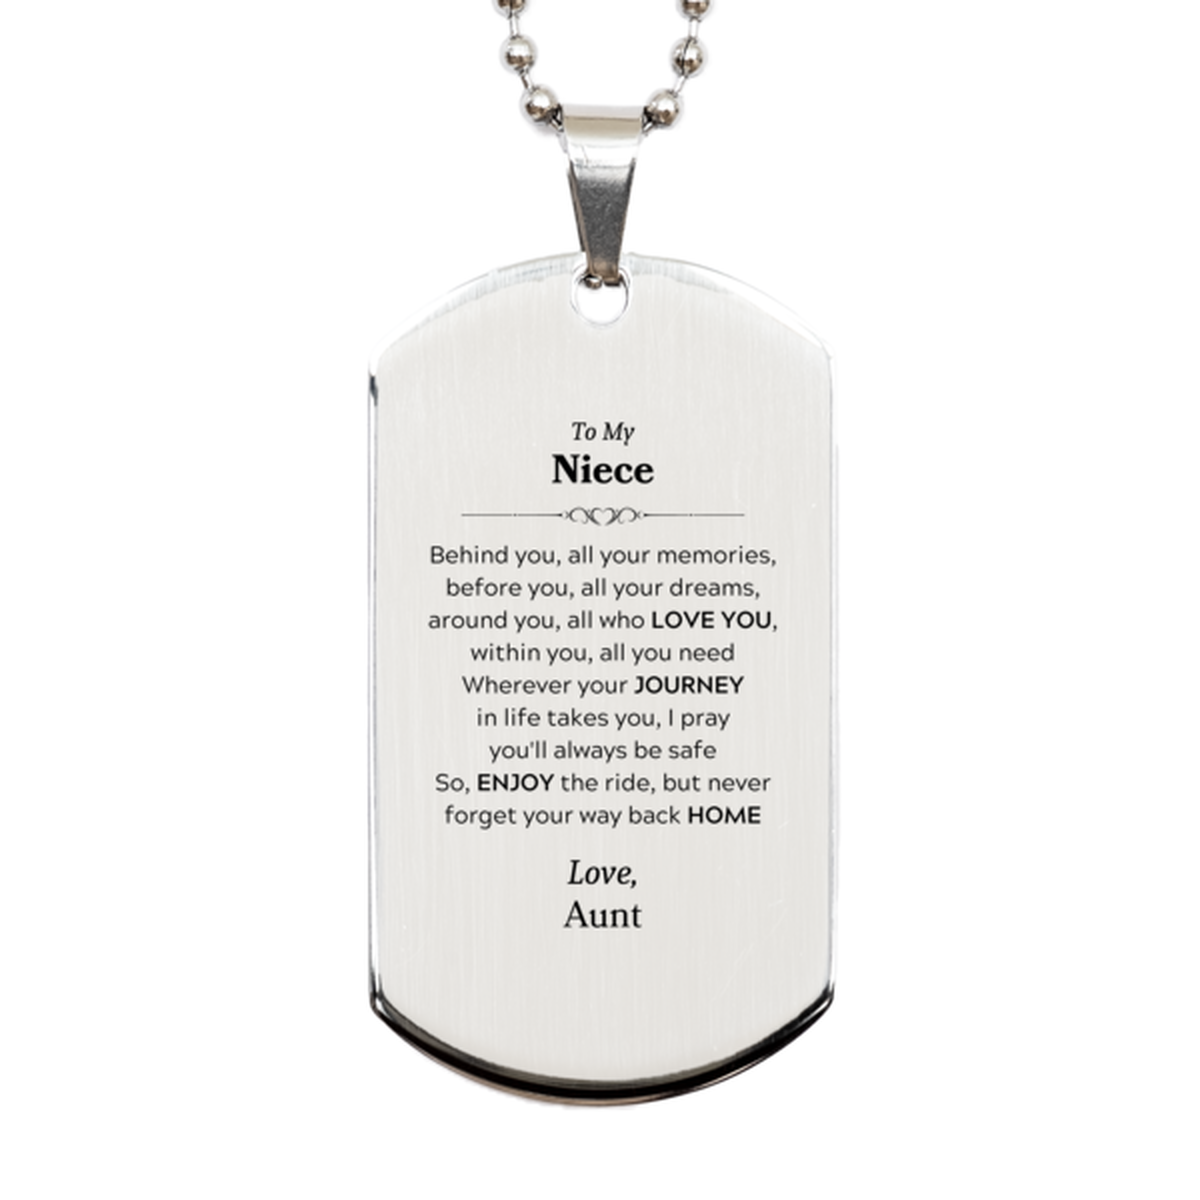 To My Niece Graduation Gifts from Aunt, Niece Silver Dog Tag Christmas Birthday Gifts for Niece Behind you, all your memories, before you, all your dreams. Love, Aunt